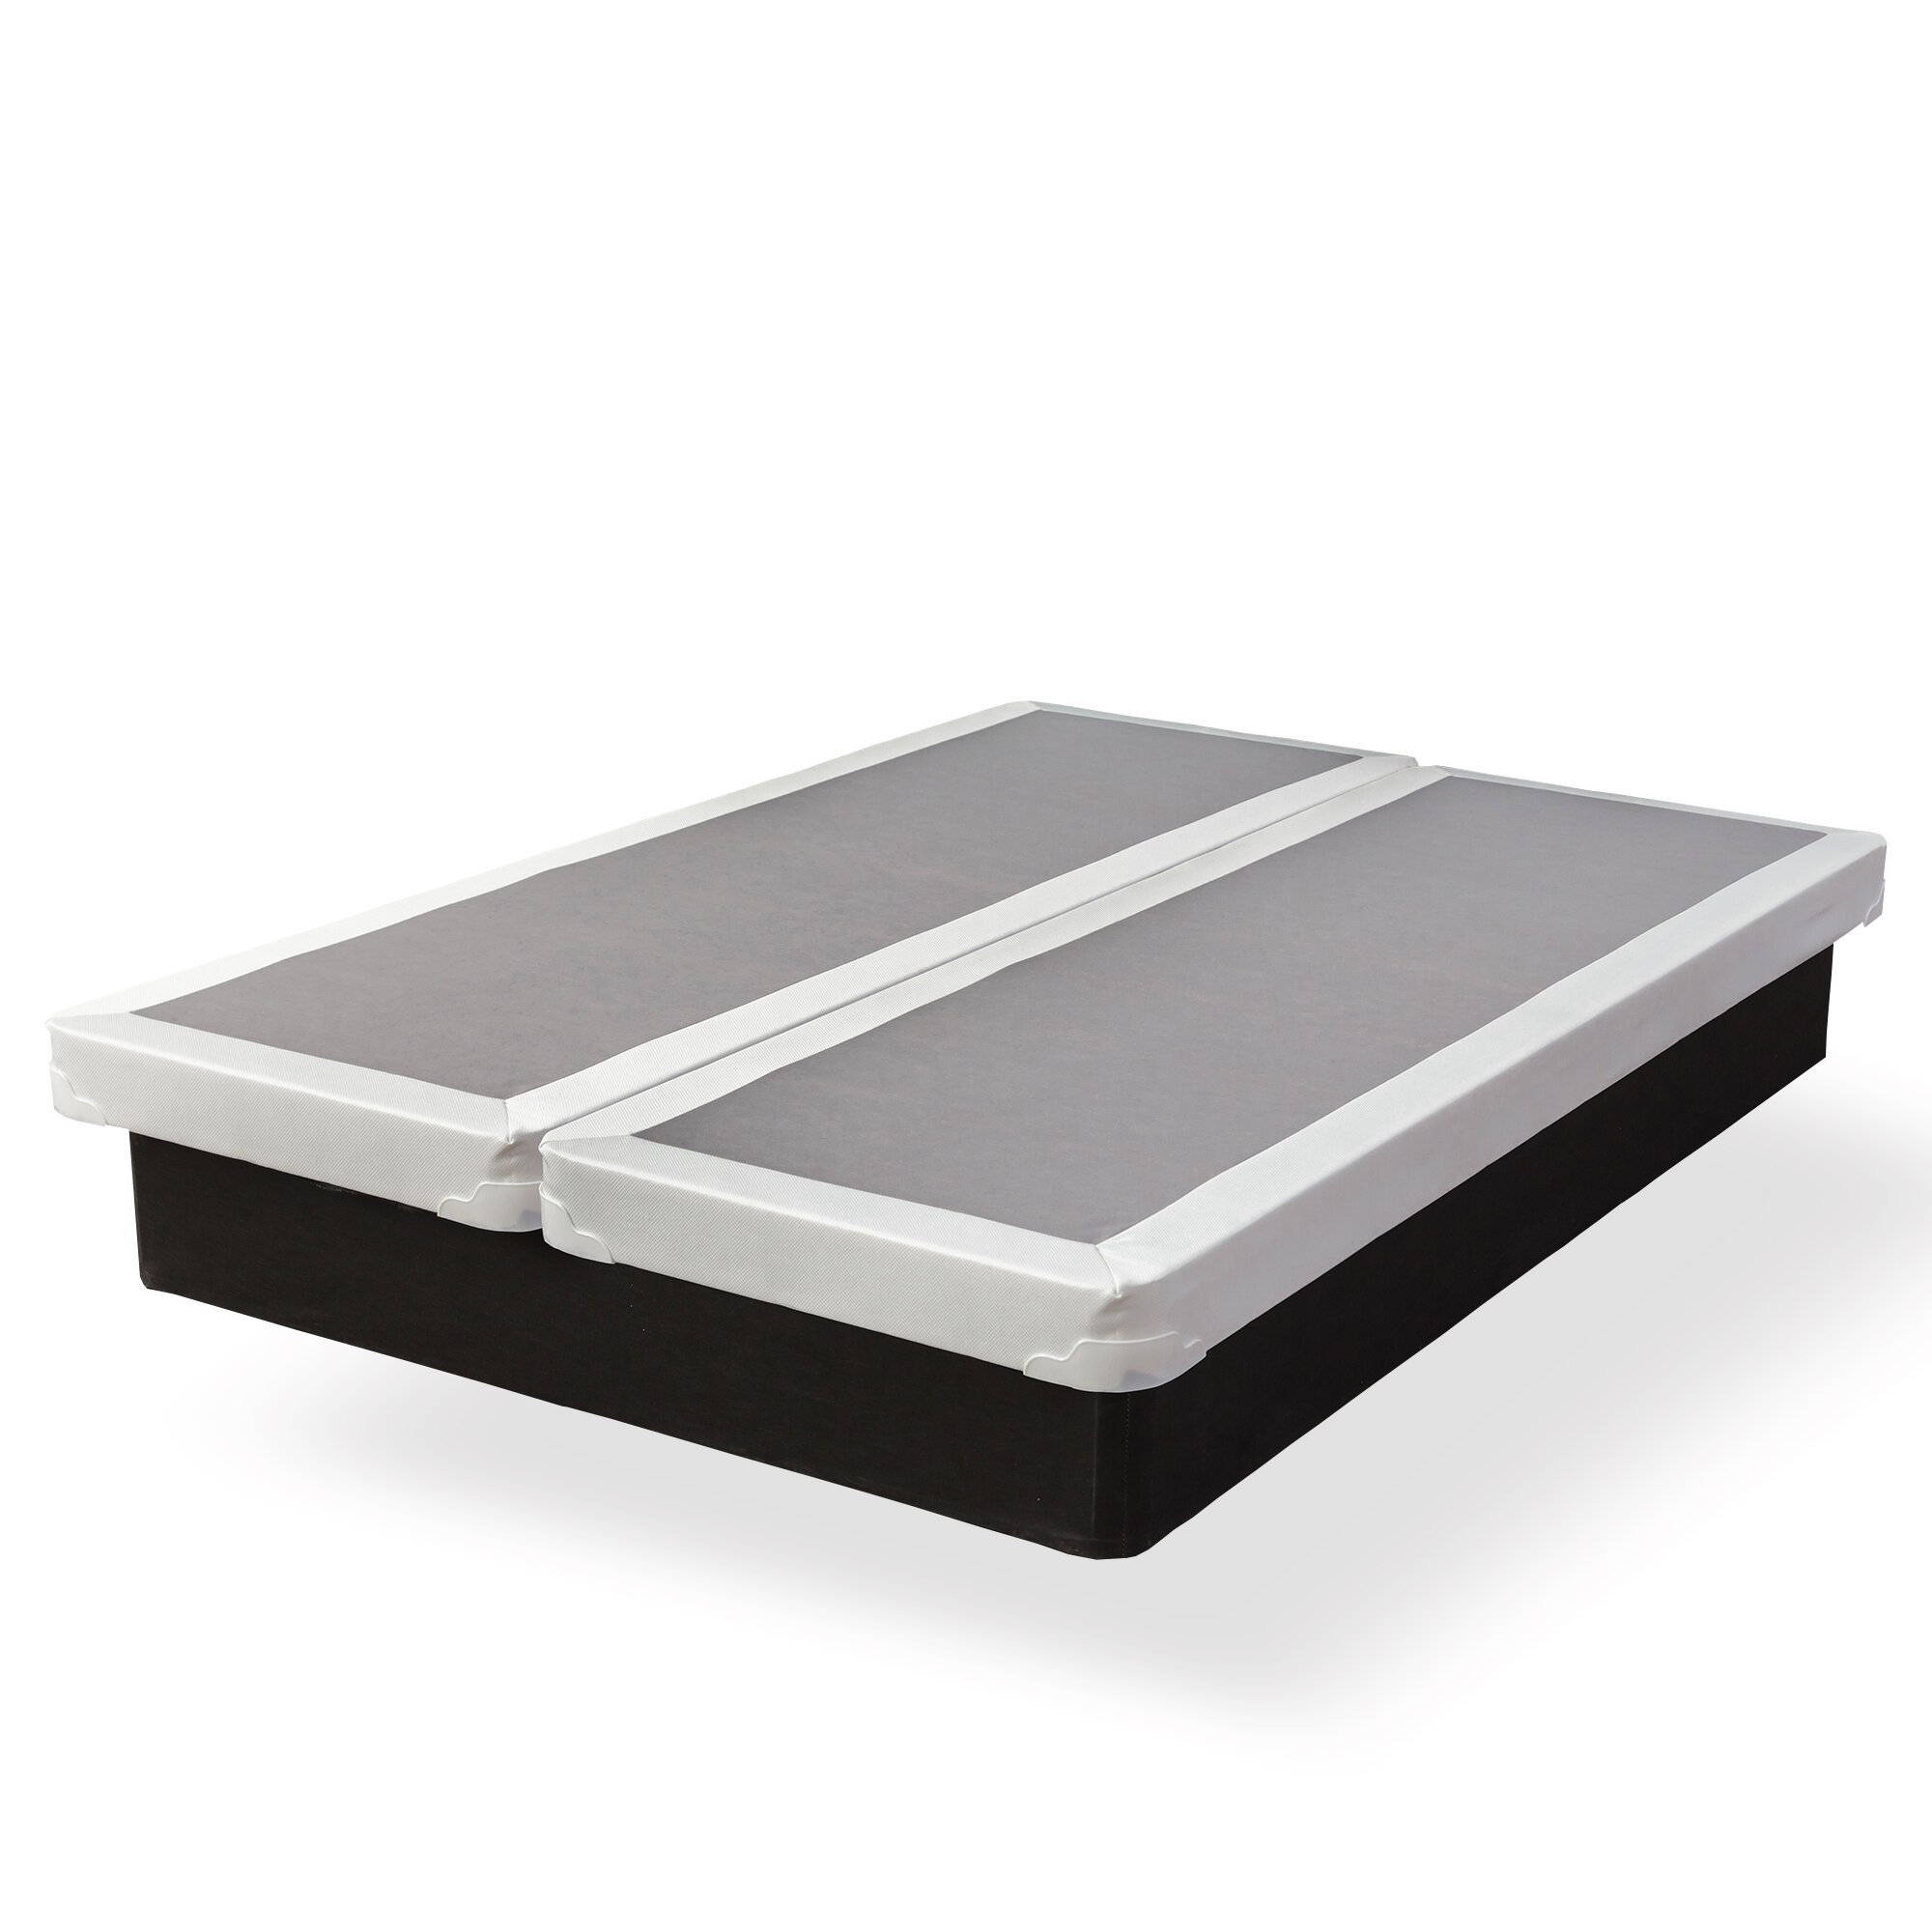 72x84 California King Size Greaton Box Spring Low Profile Mattress Foundation//Strong Structure